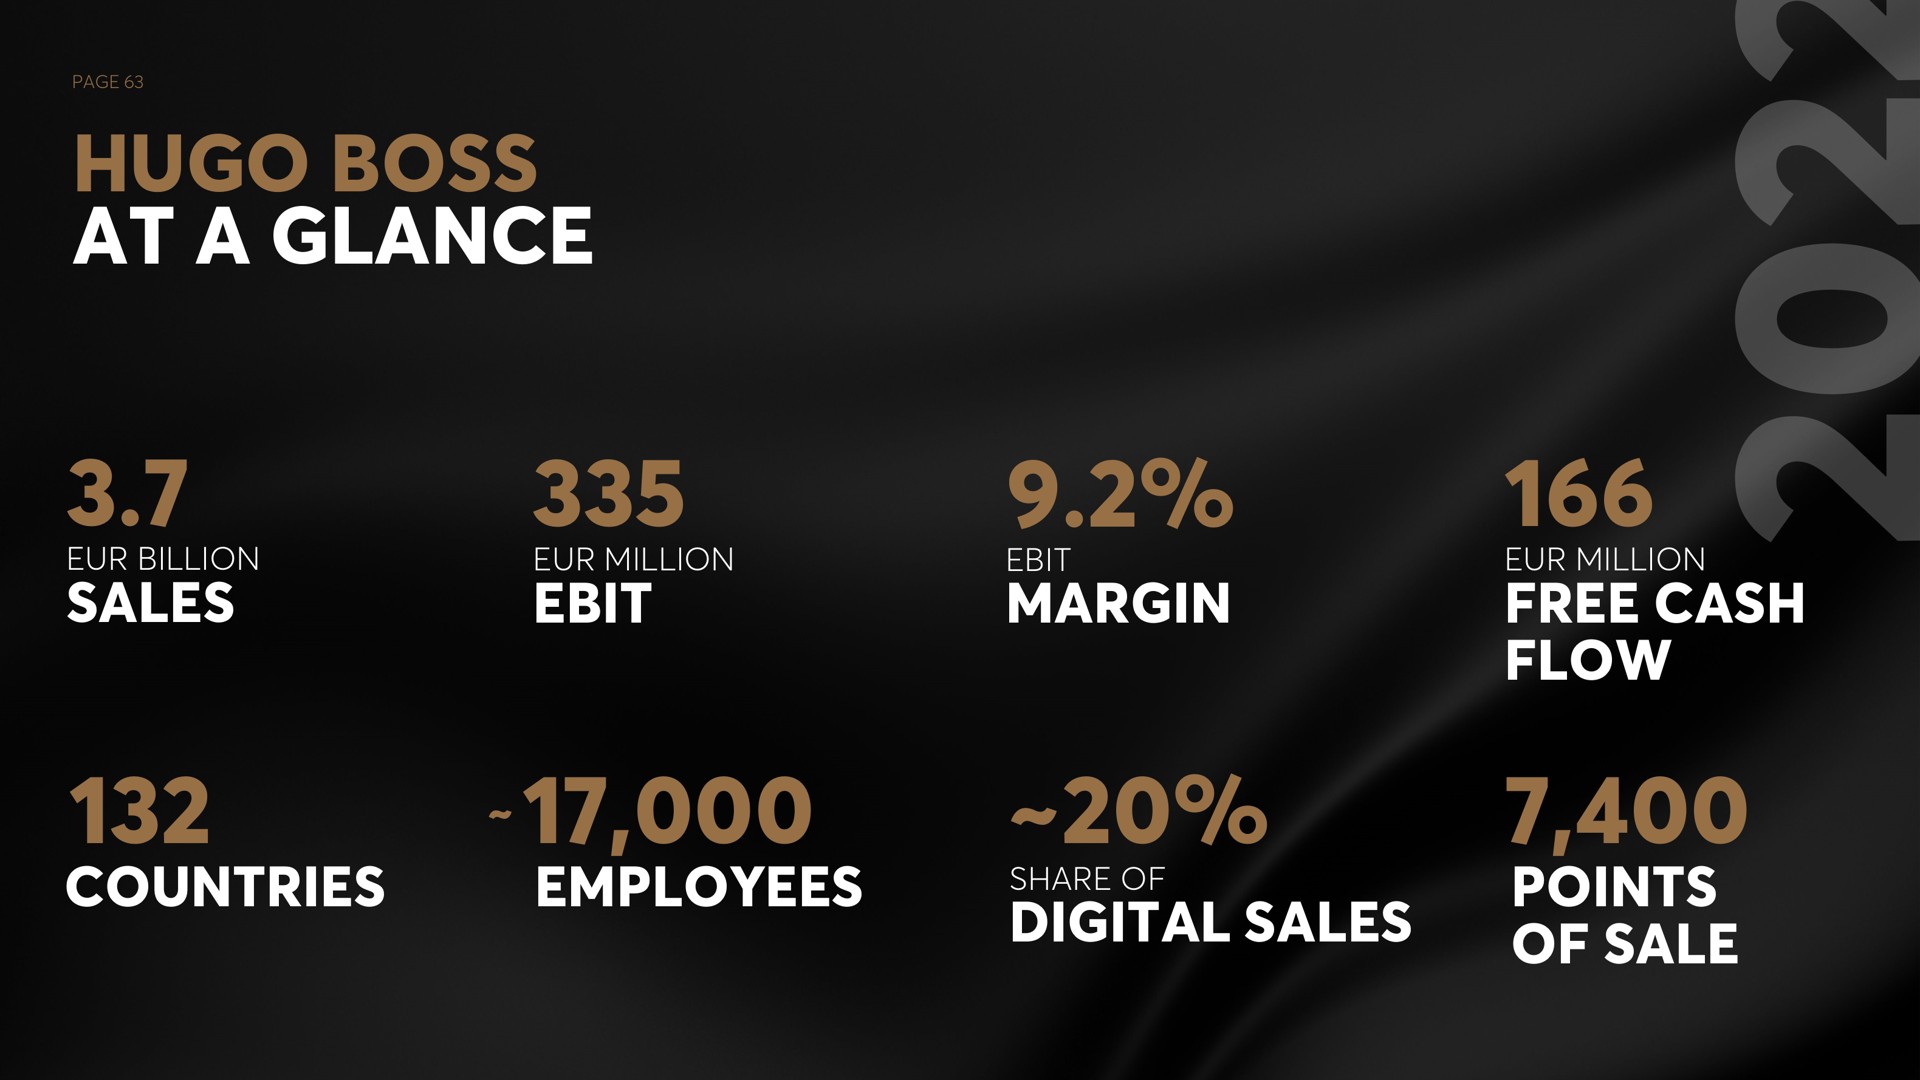 page boss at a glance billion sales million margin million free cash flow countries employees share of digital sales points of sale let low | Hugo Boss